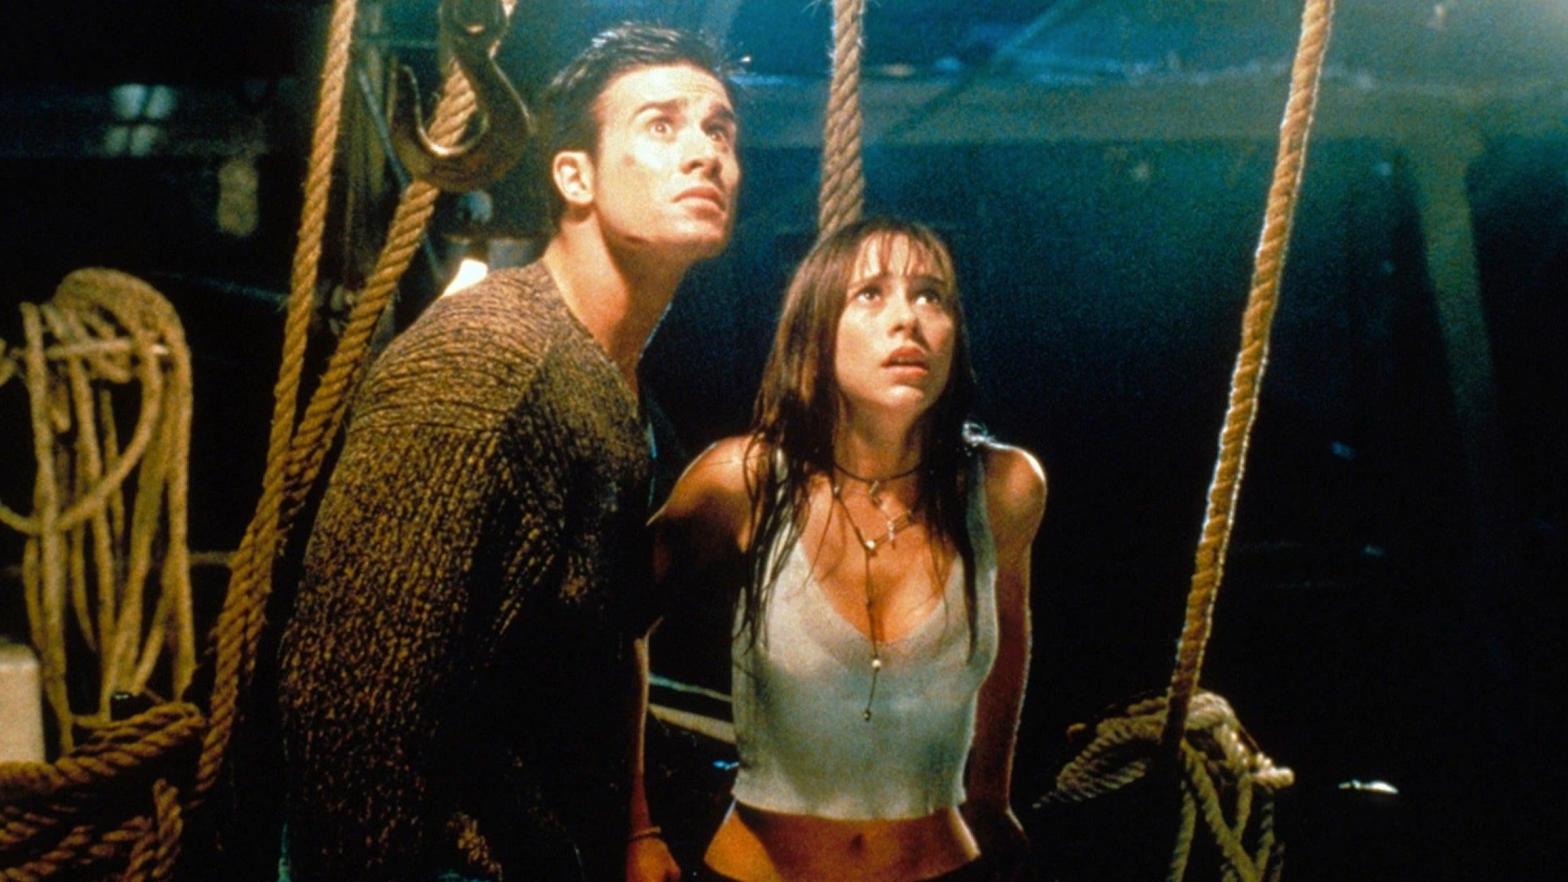 Freddie Prinze Jr. and Jennifer Love Hewitt will return for a sequel to I Know What You Did Last Summer. (Image: Sony)